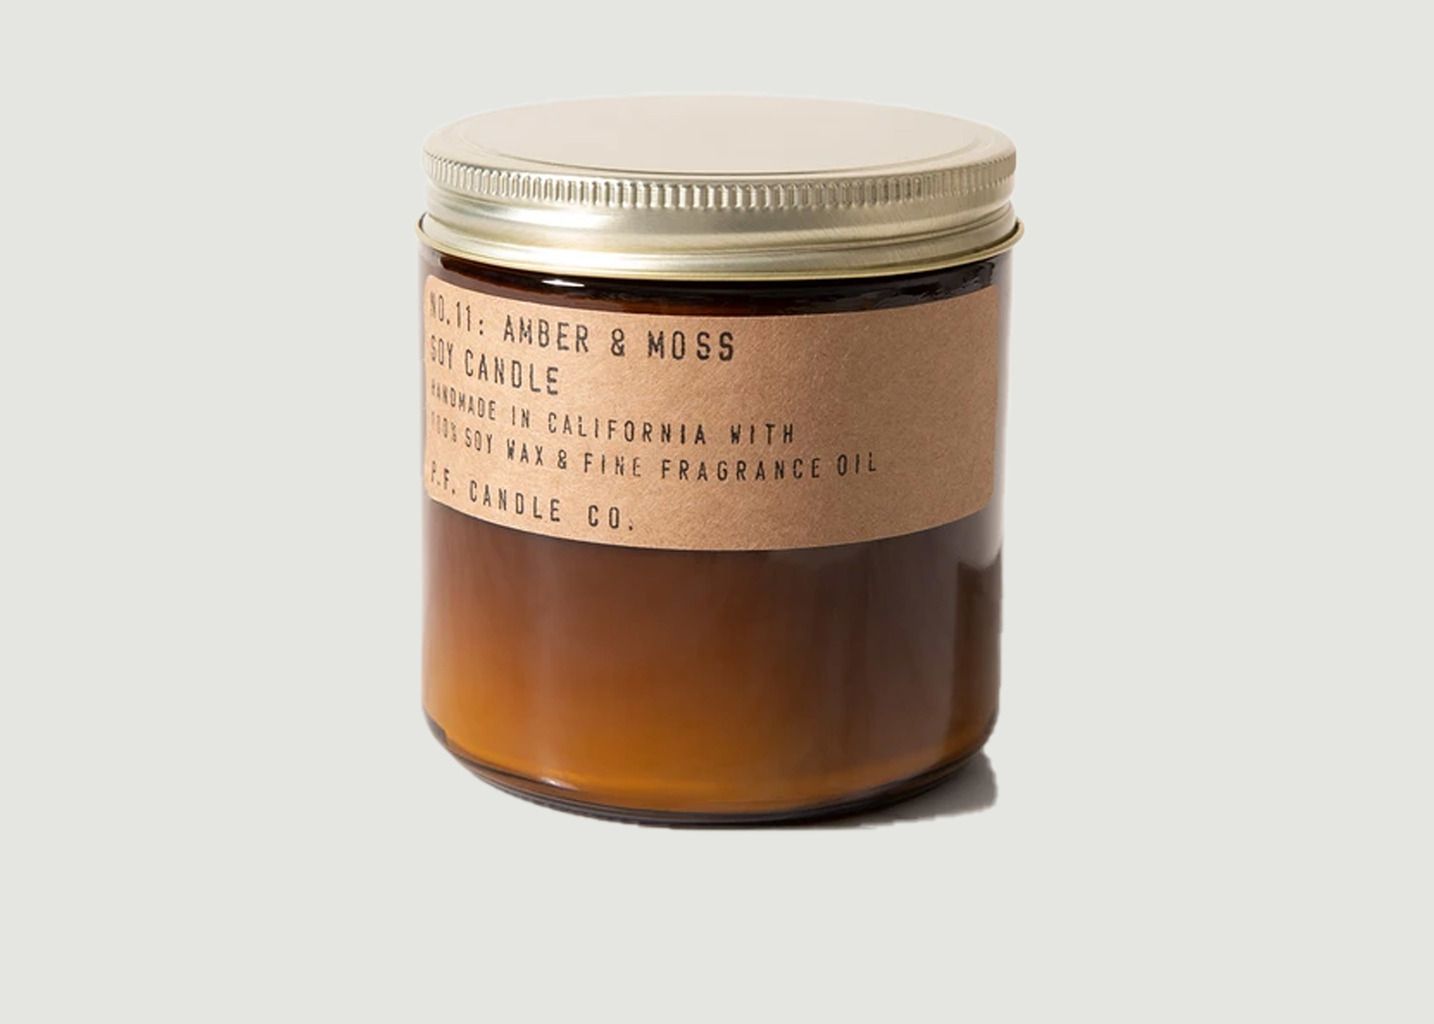 Bougie n°11 Amber Moss large - P.F. Candle CO.